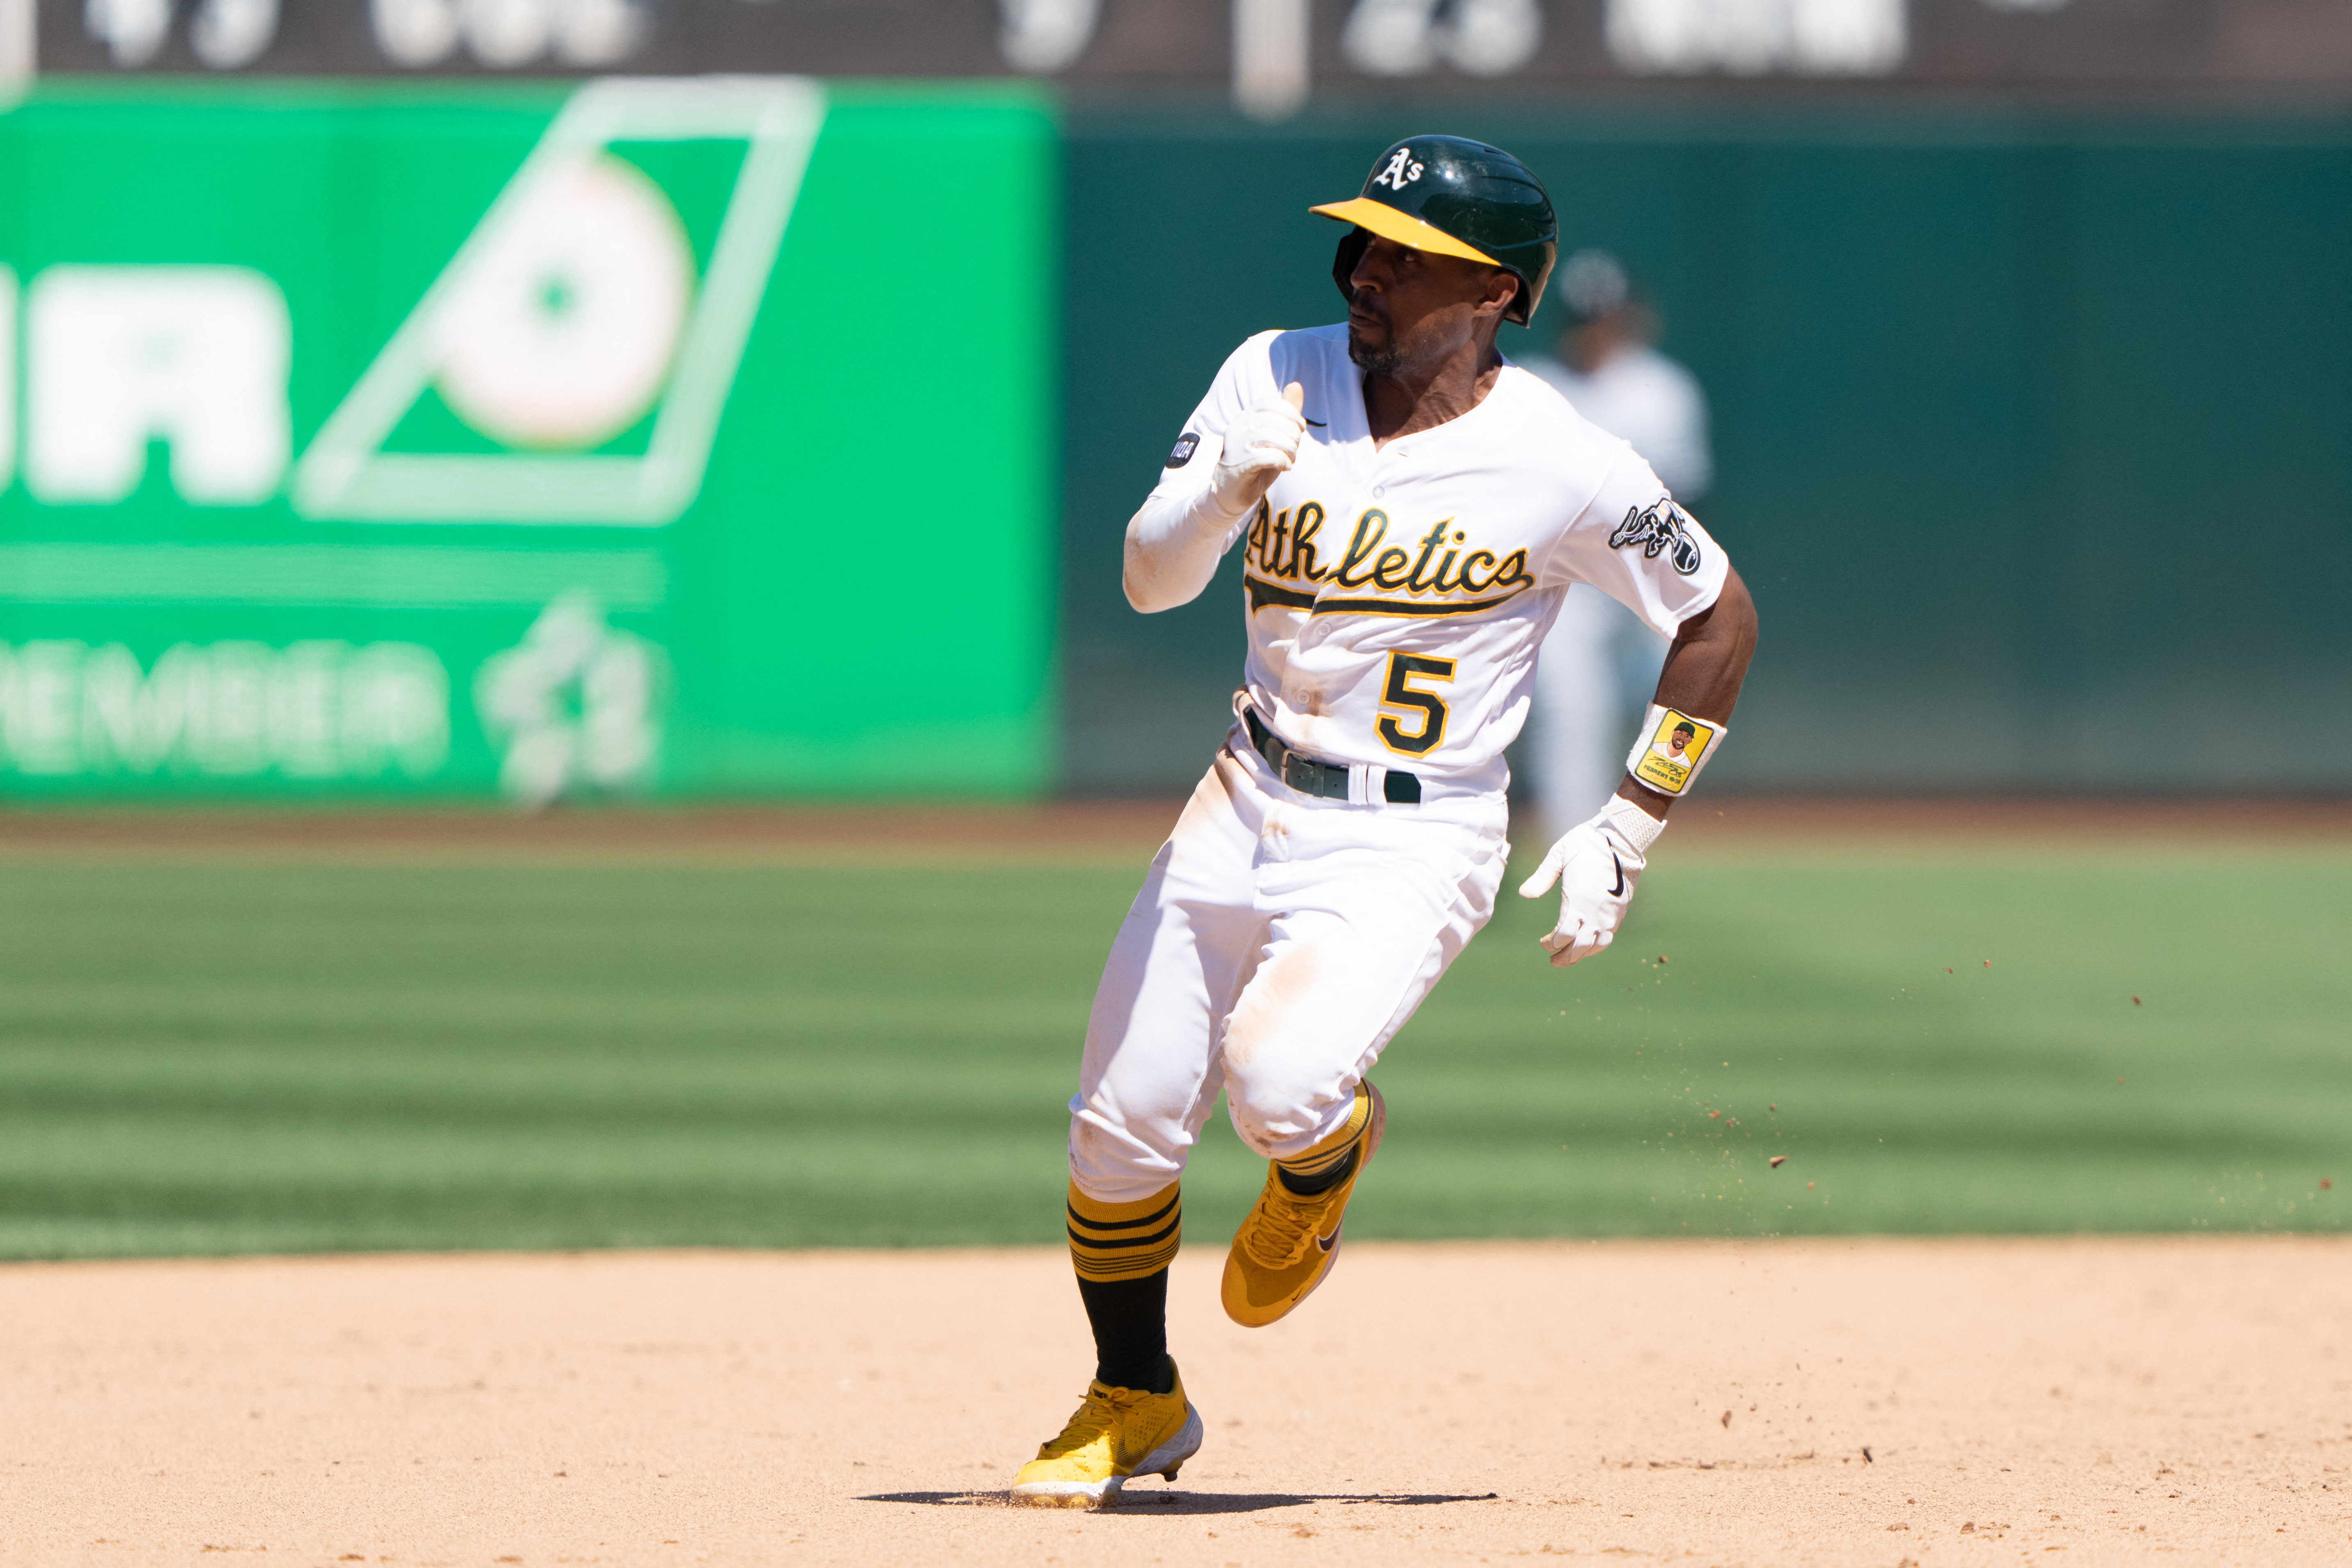 A's beat White Sox 7-4 to move Melvin closer to milestone - The Pajaronian